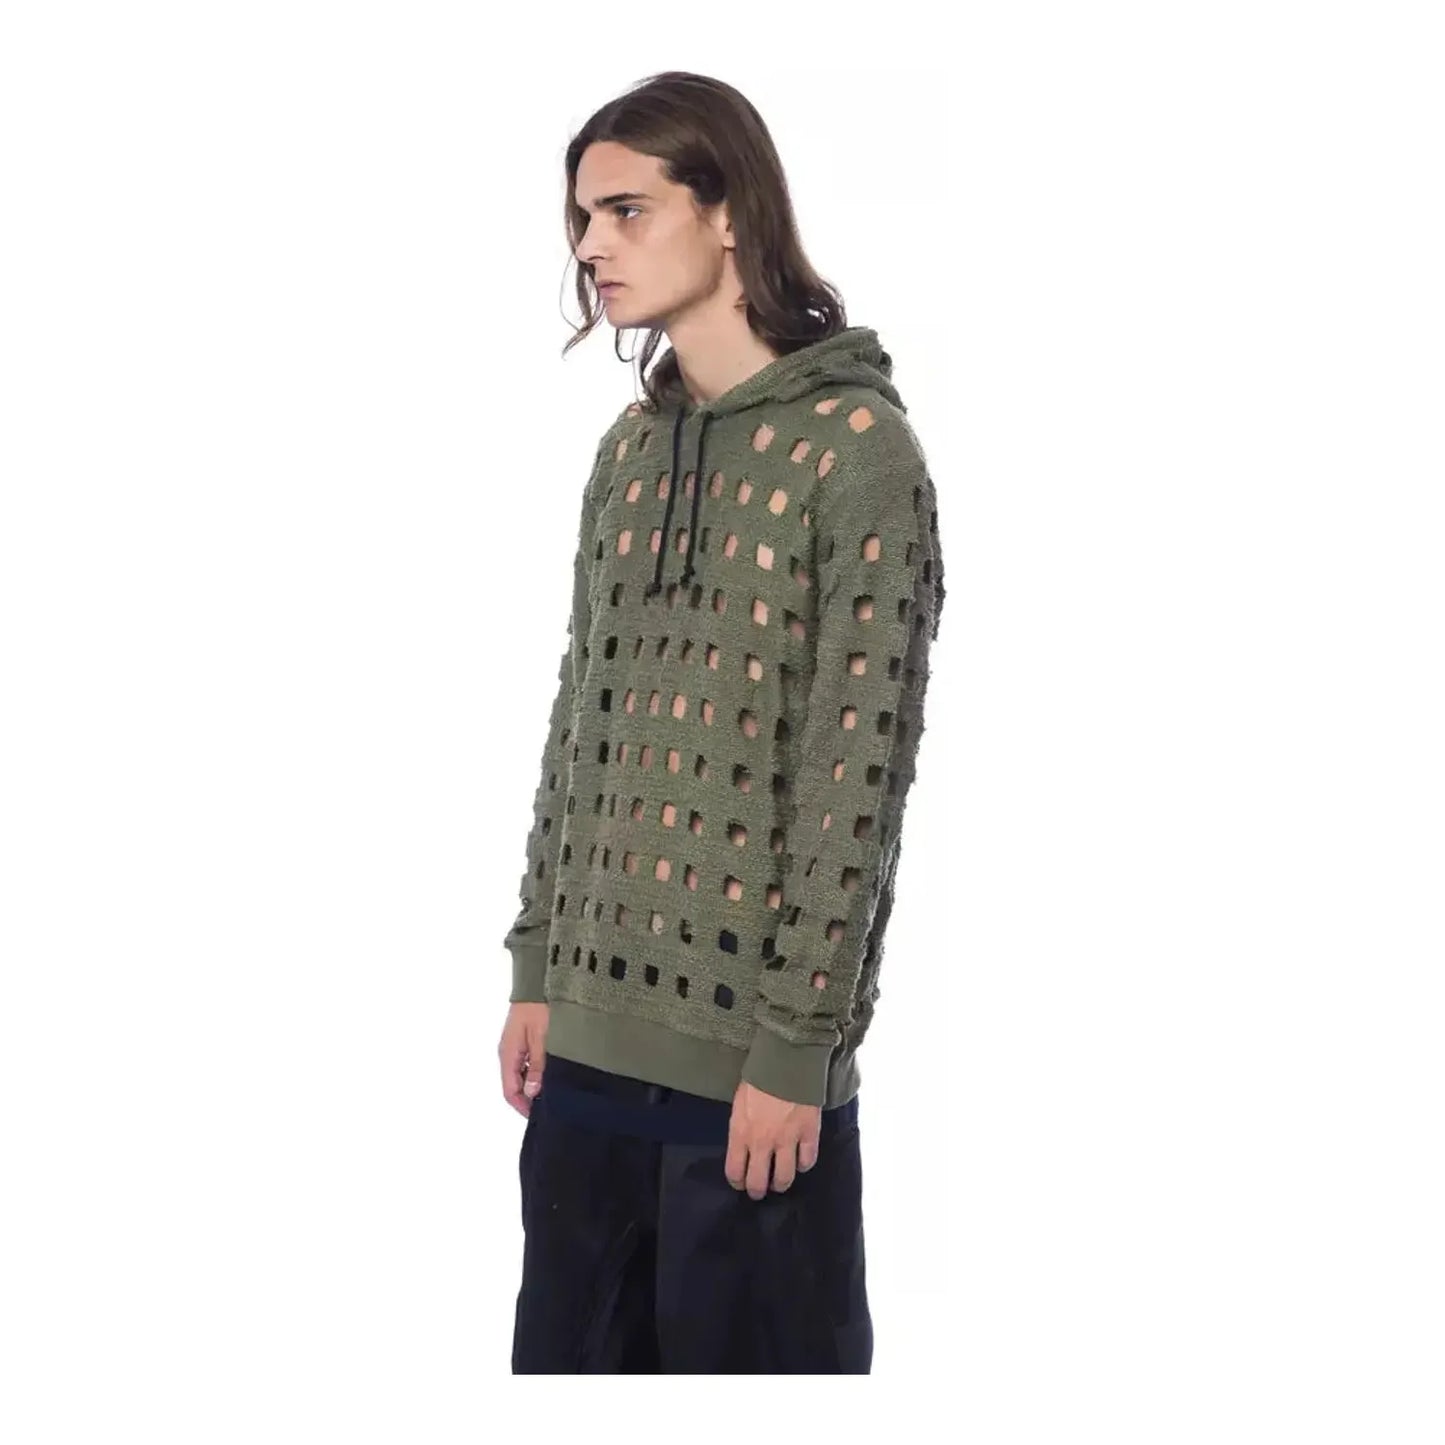 Nicolo Tonetto Army Perforated Cotton Hoodie - Casual Elegance army-sweater